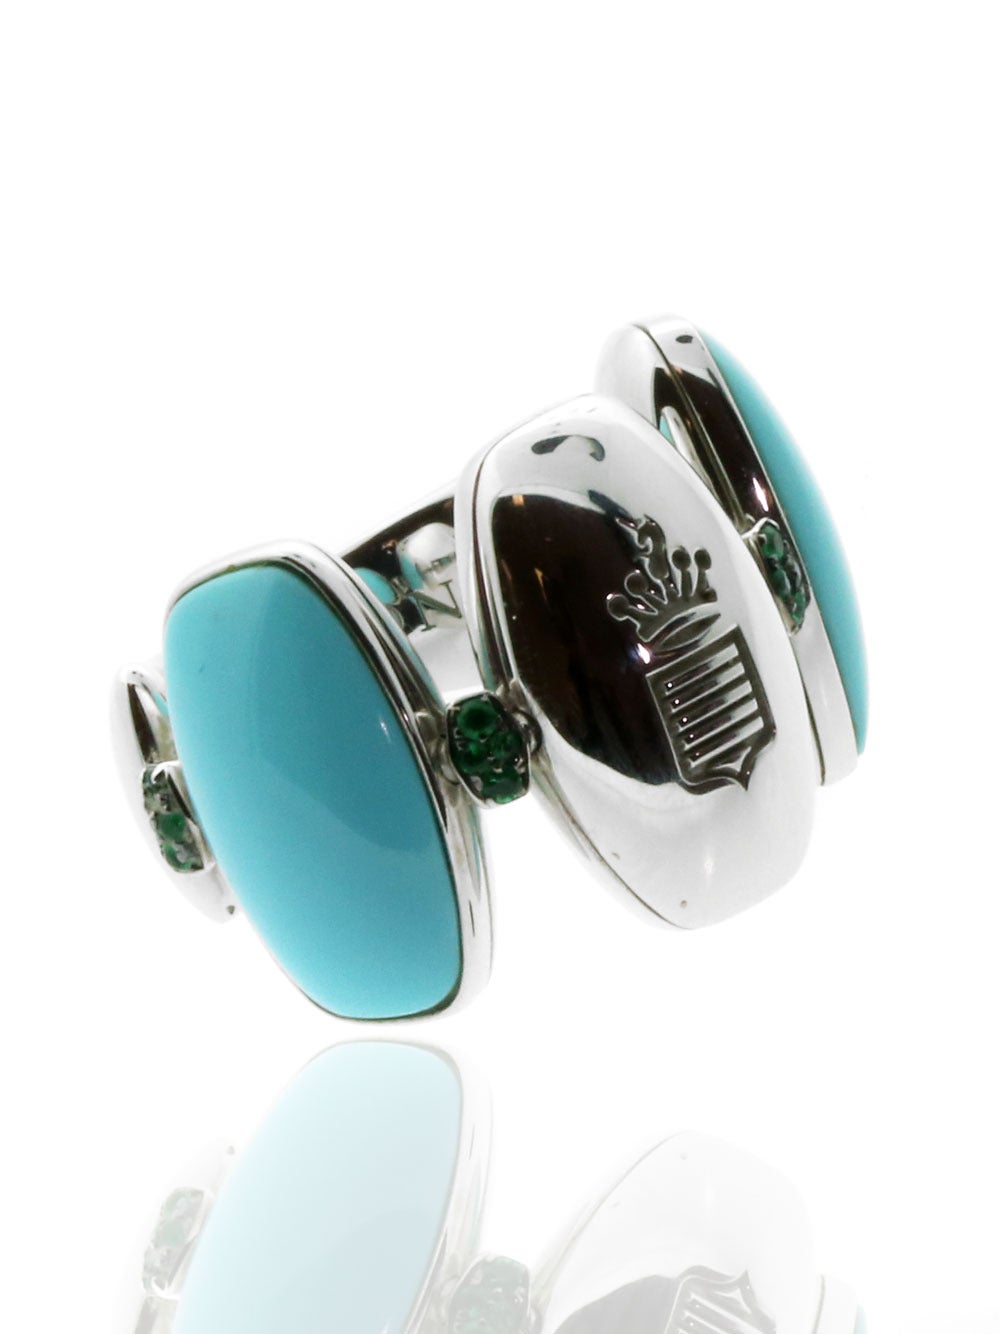 Verdant Emeralds and vibrant Turquoise alternate across this 18k White Gold Ring by De Grisogono, offering one of the jewelry world’s most rare and coveted combinations. There are a total of 16 Round Emeralds (comprising .10ct) and 3 Cabochon